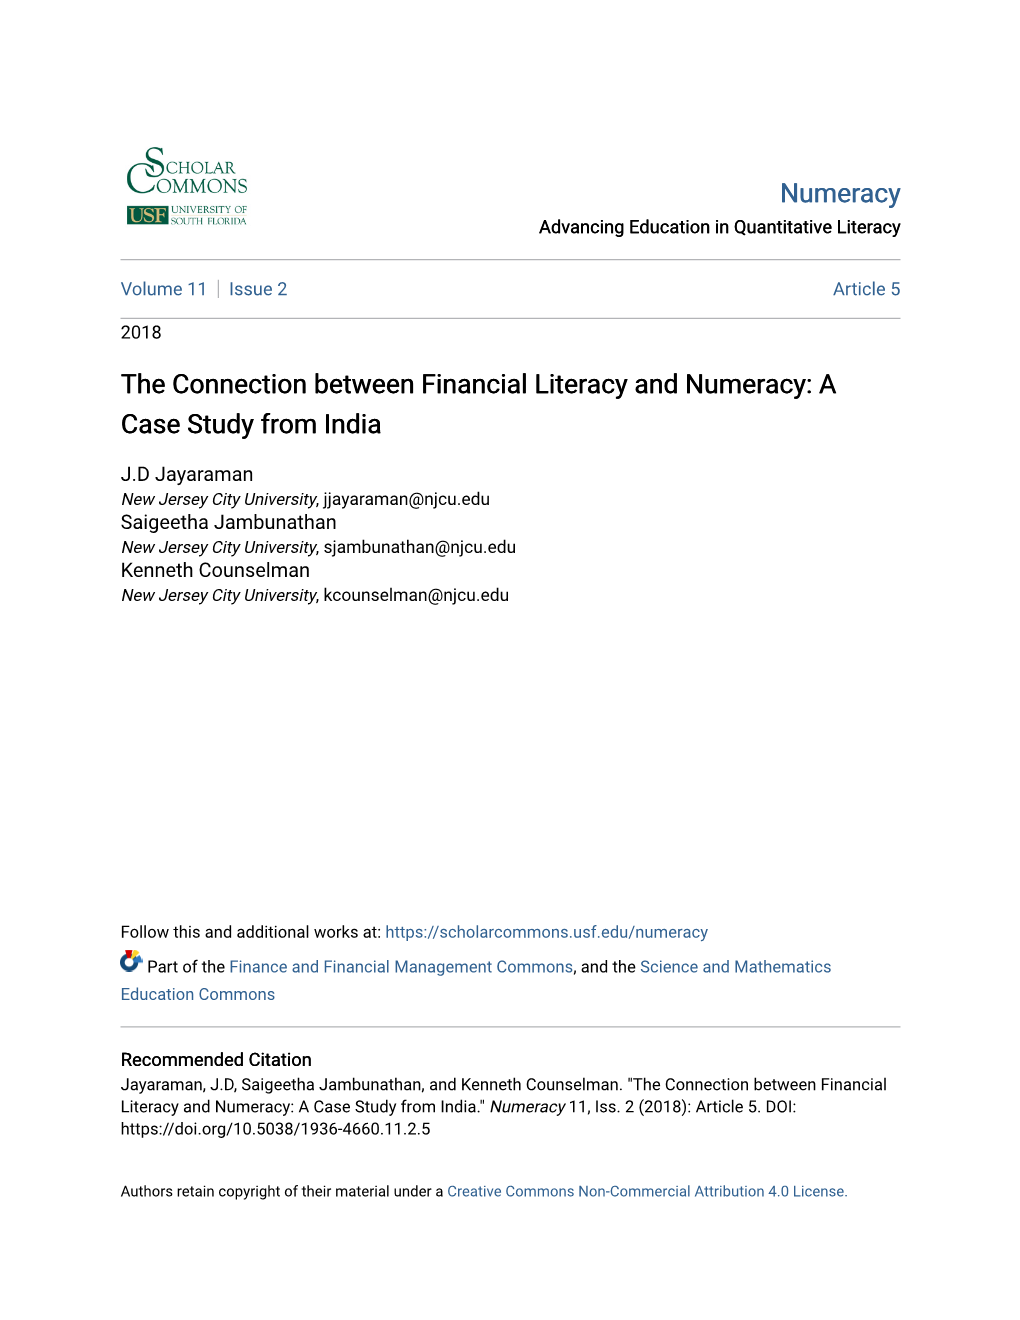 The Connection Between Financial Literacy and Numeracy: a Case Study from India